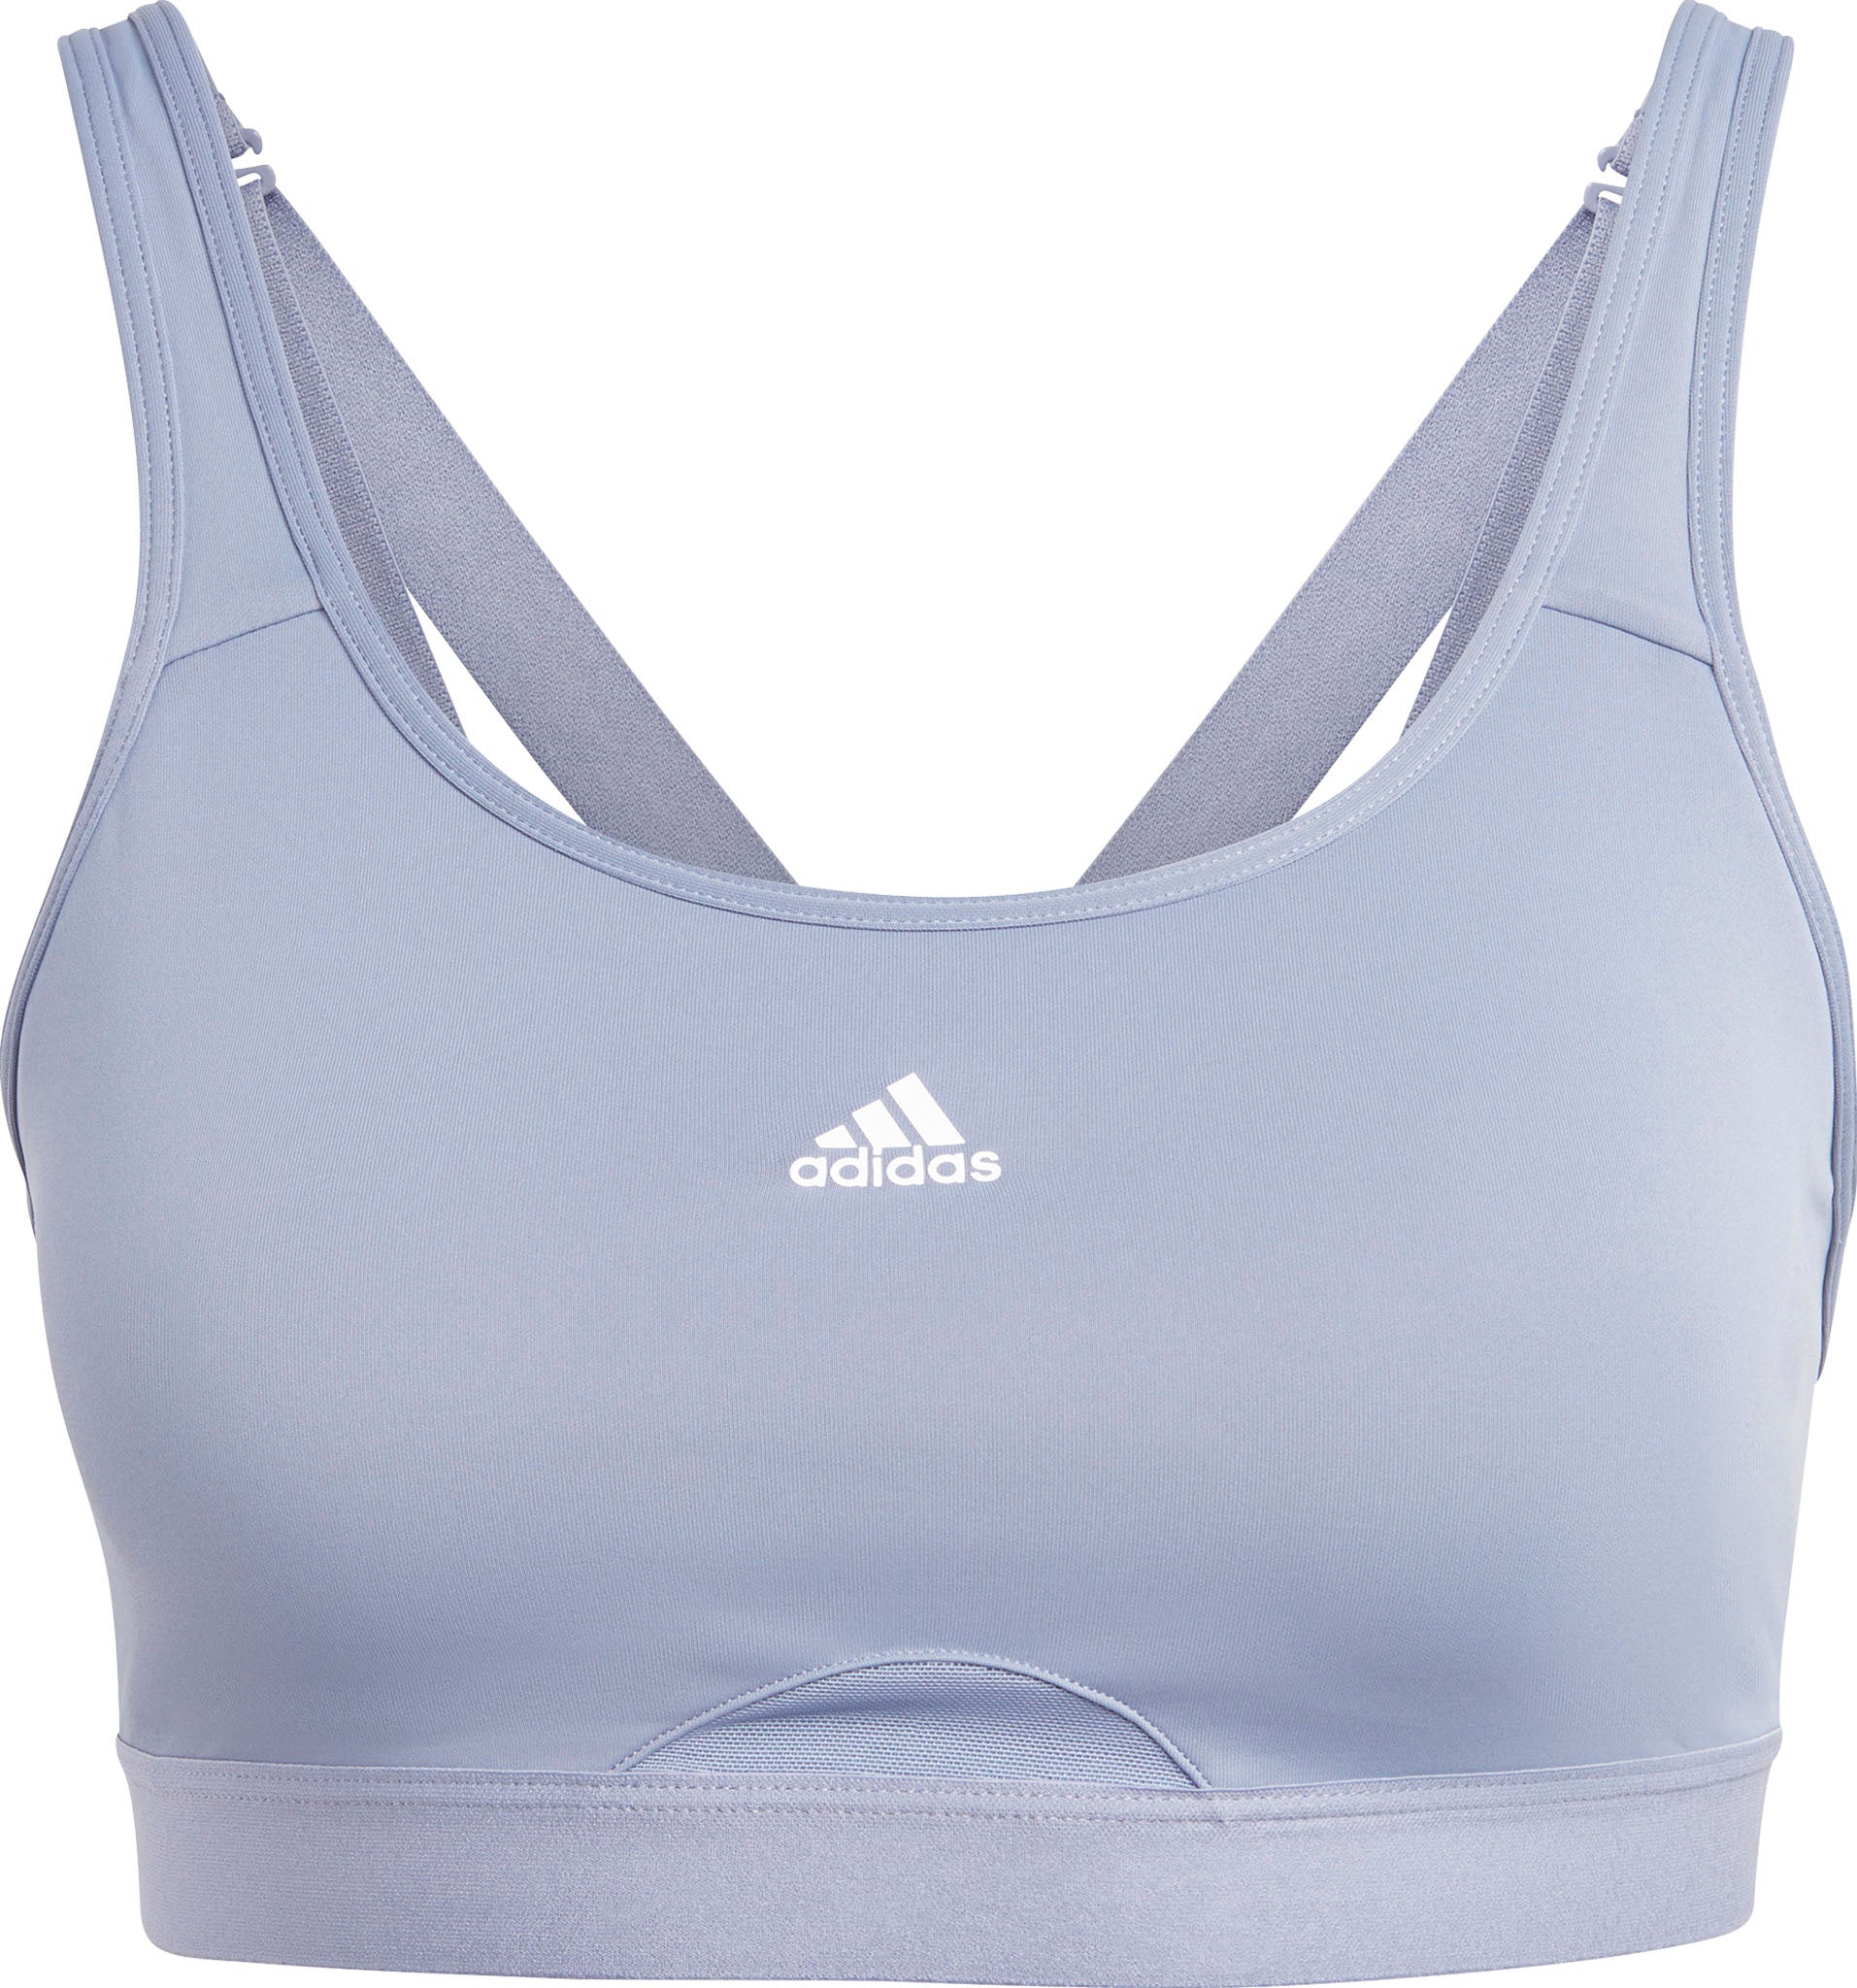 adidas TLRD Move Training High-Support Bra - Women's